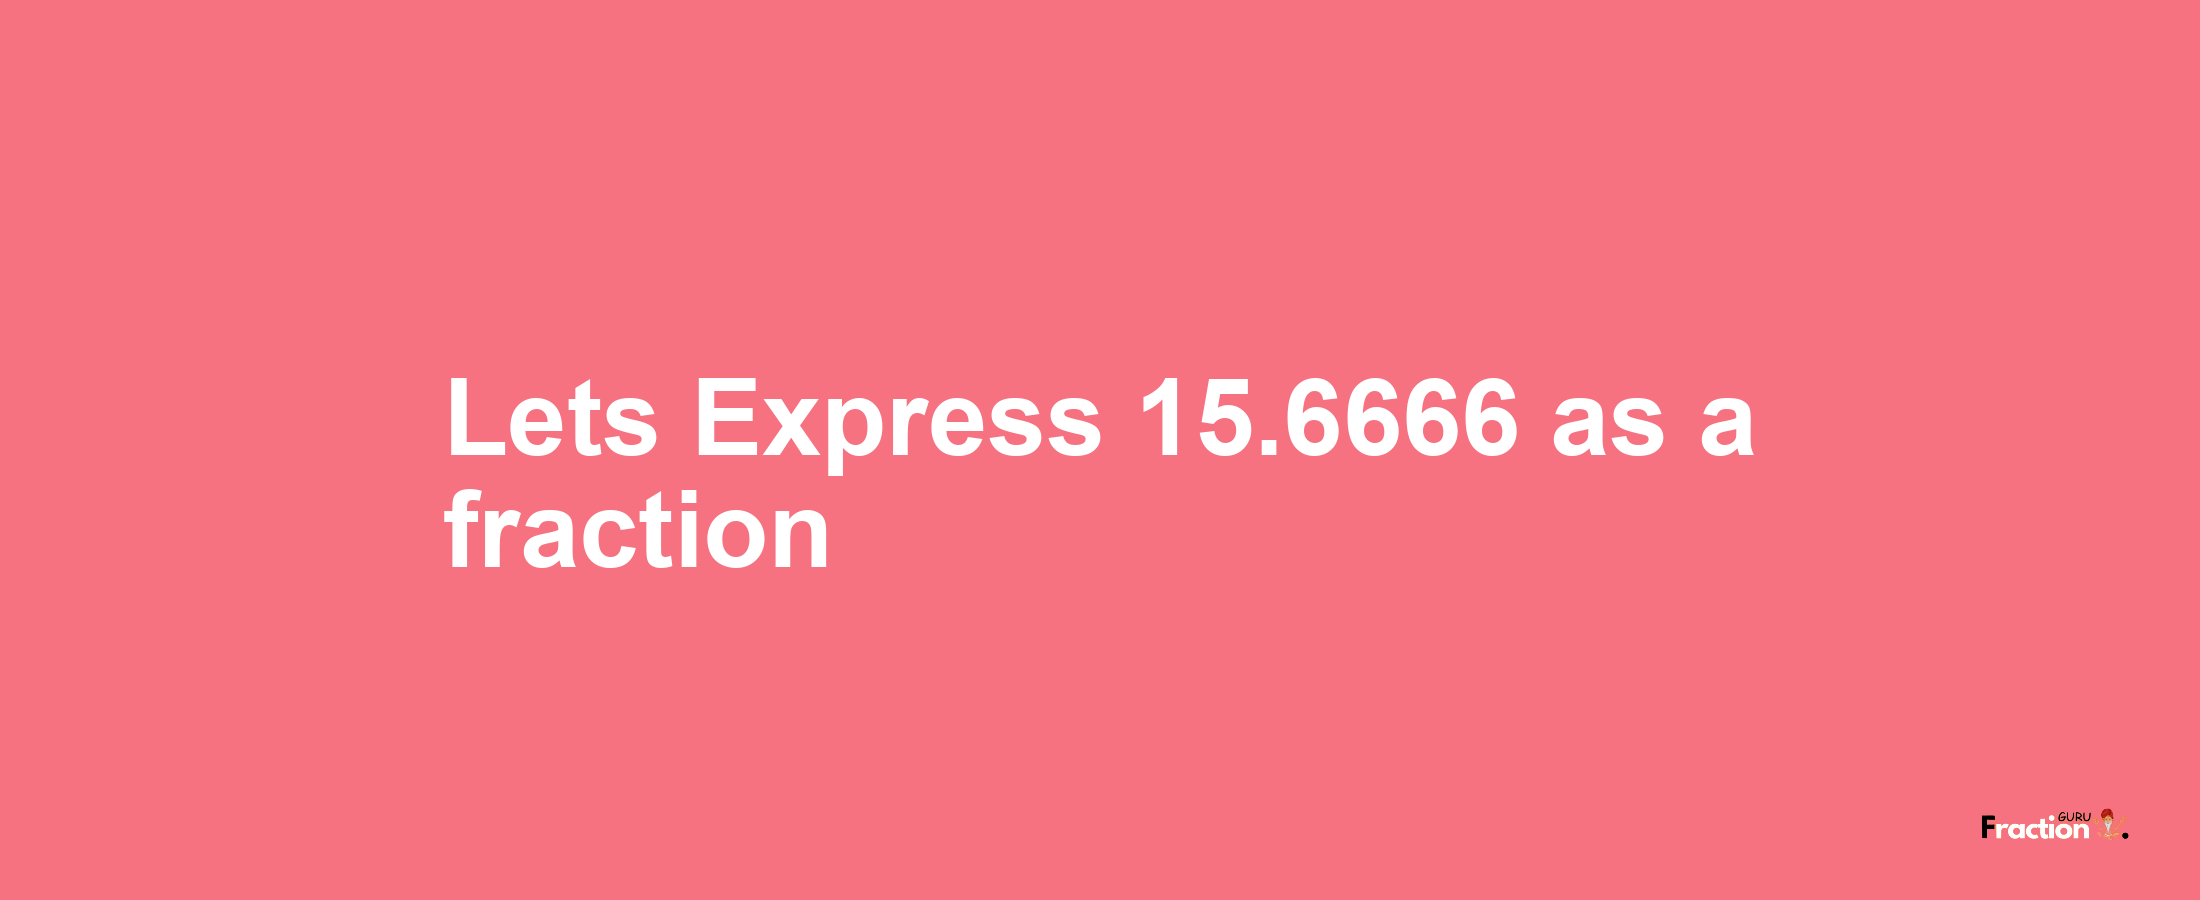 Lets Express 15.6666 as afraction